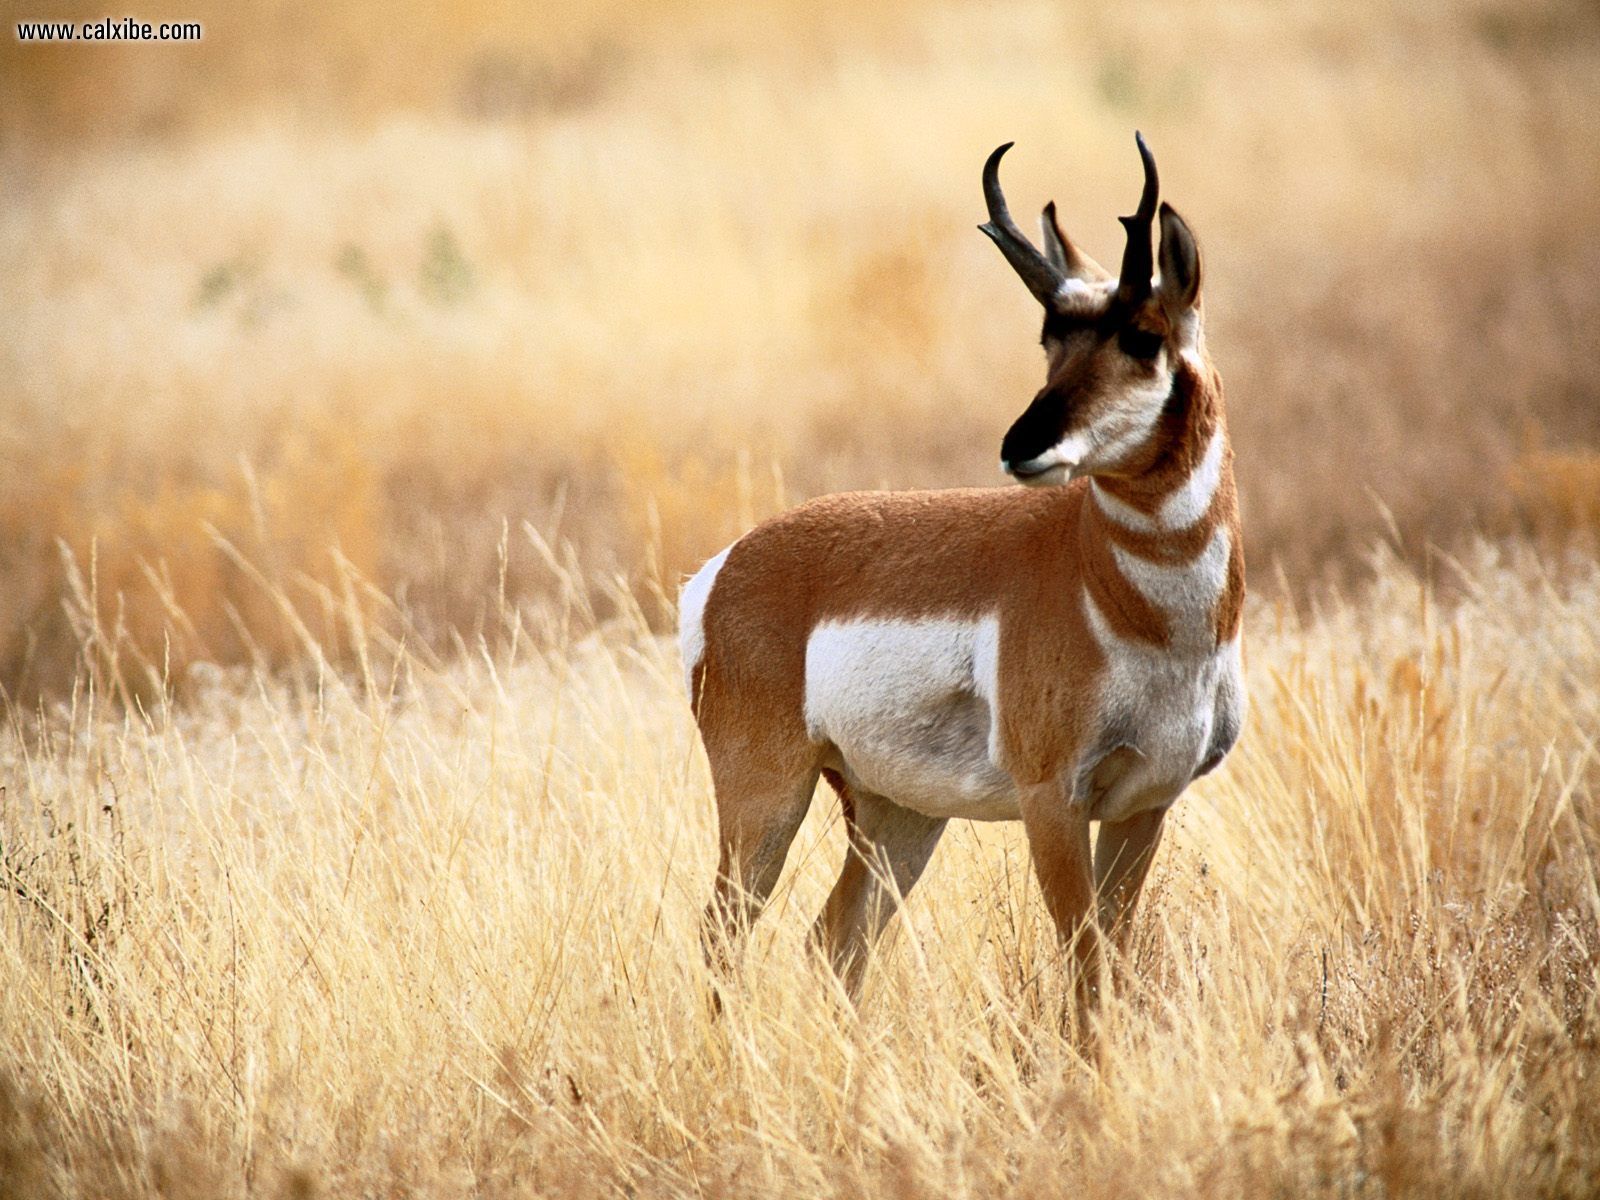 Show me a picture of an antelope